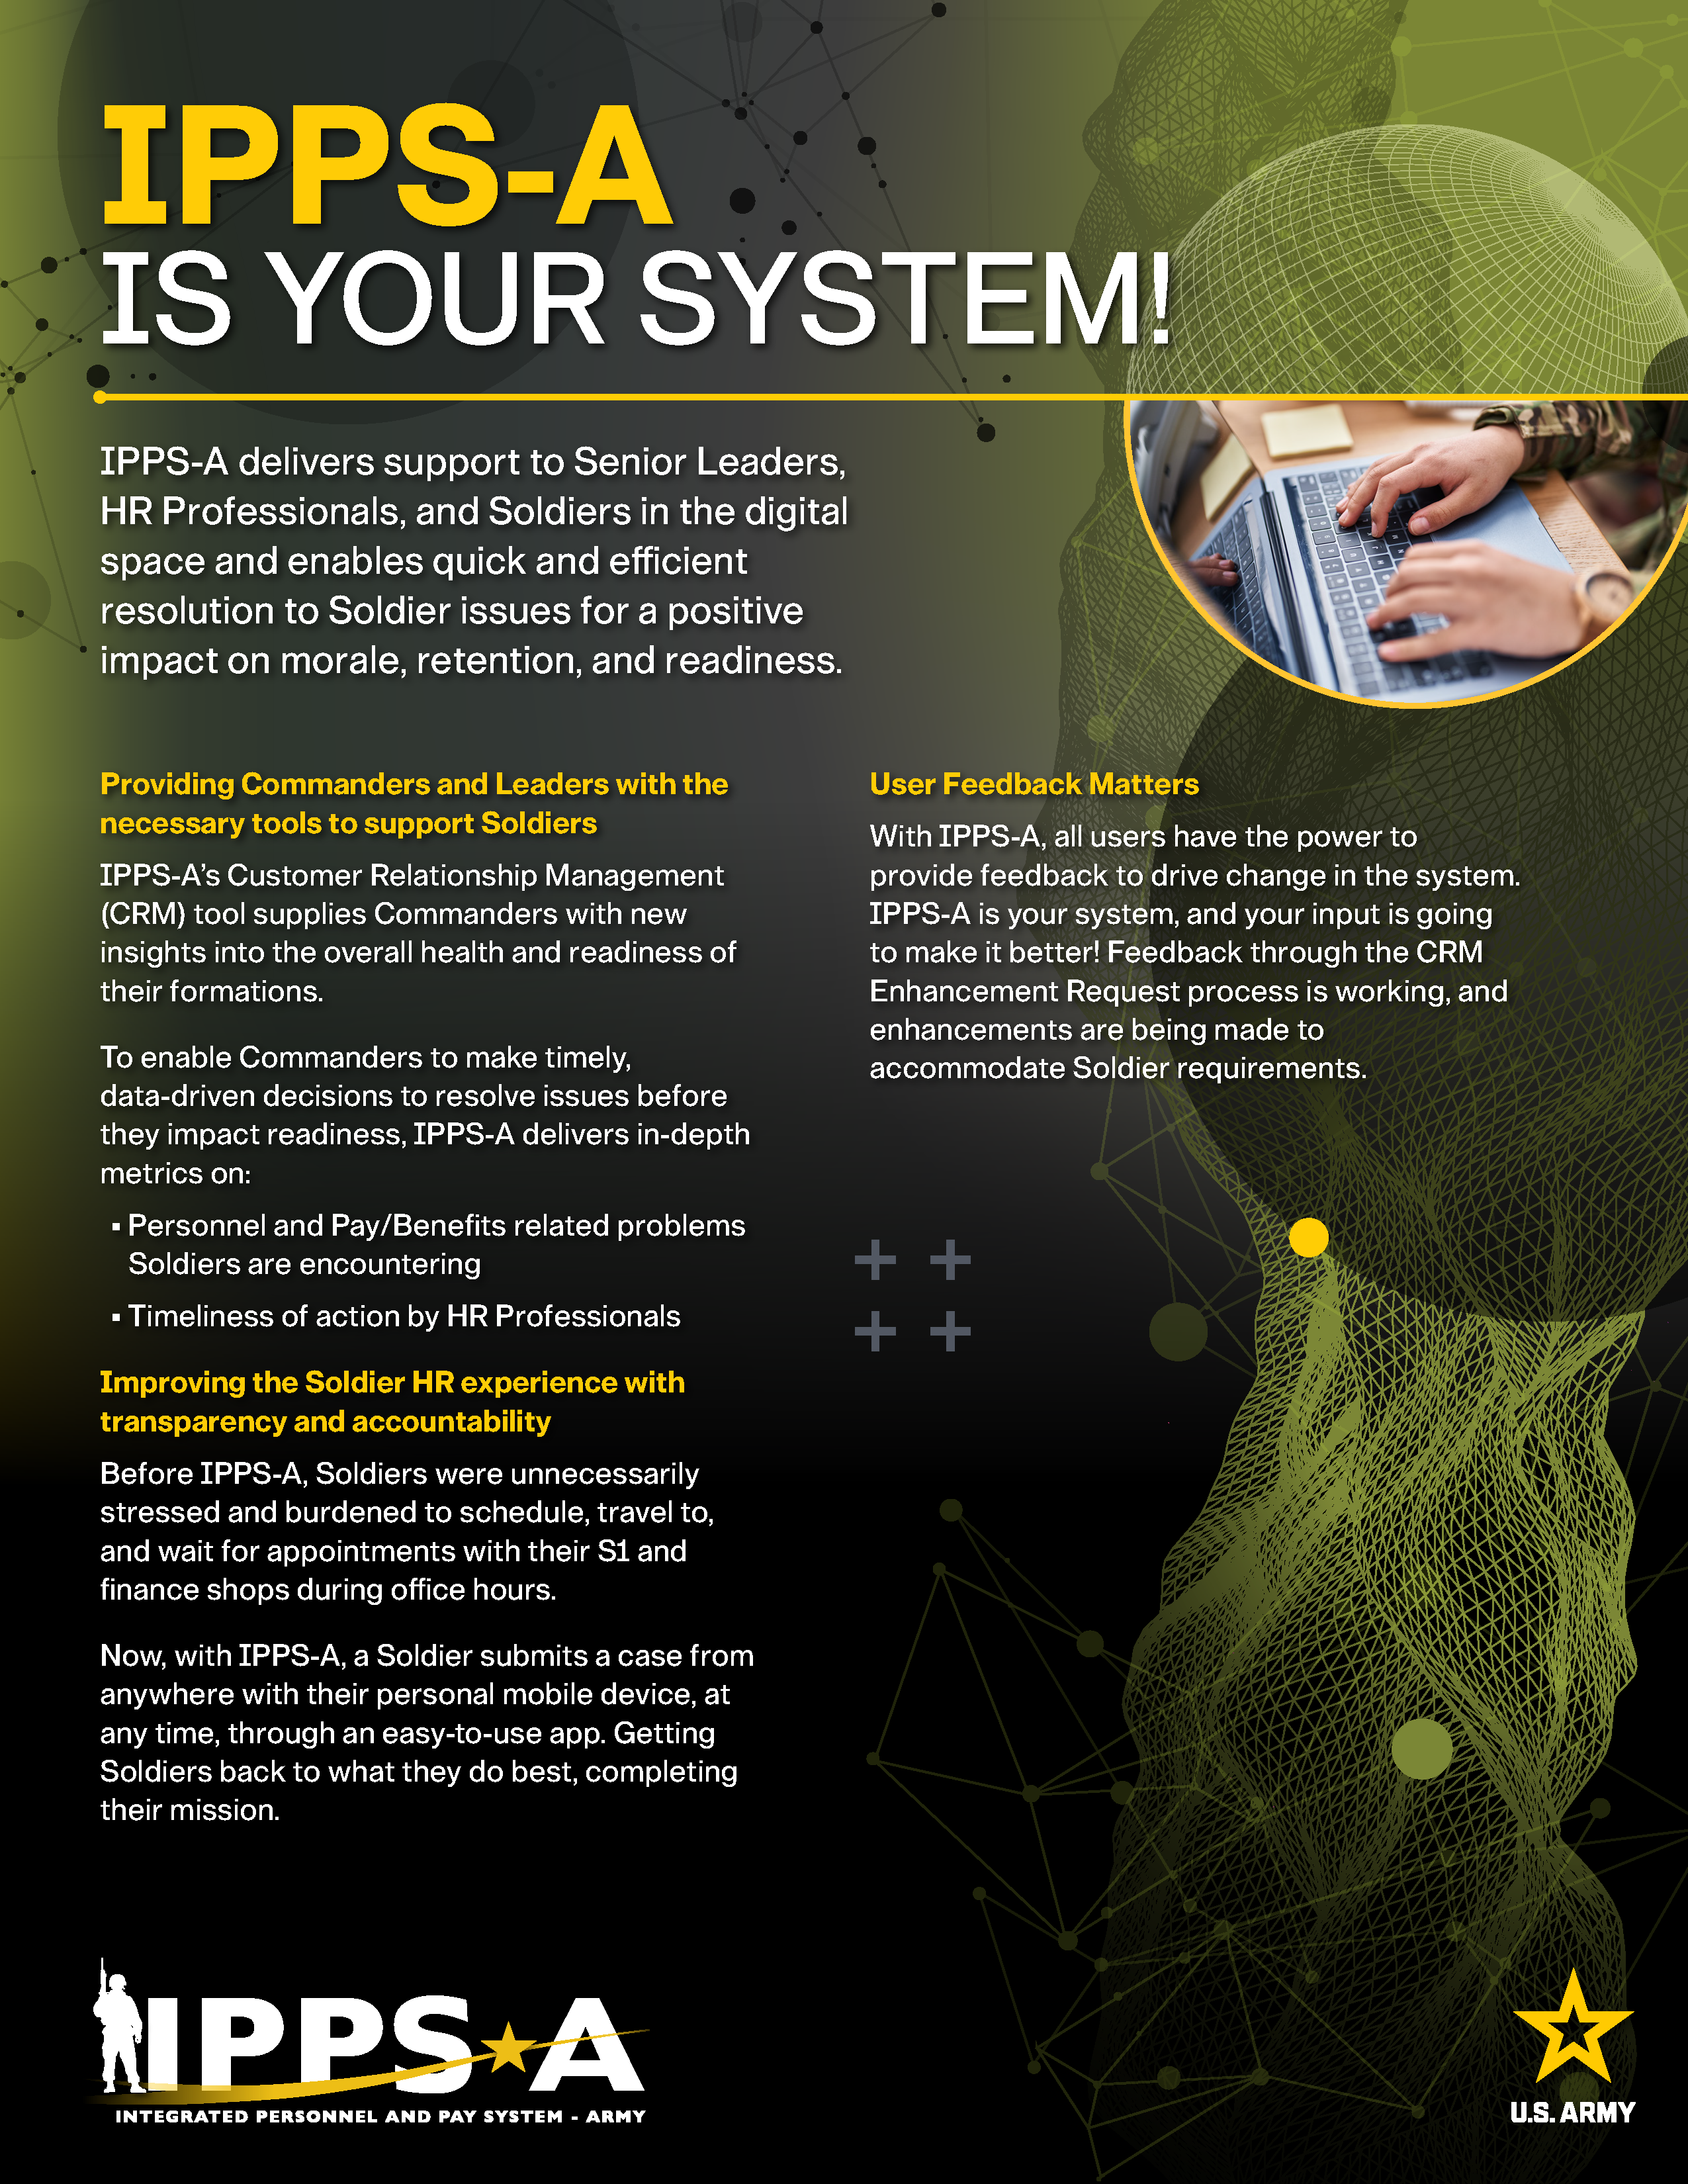 IPPS-A is Your System handout